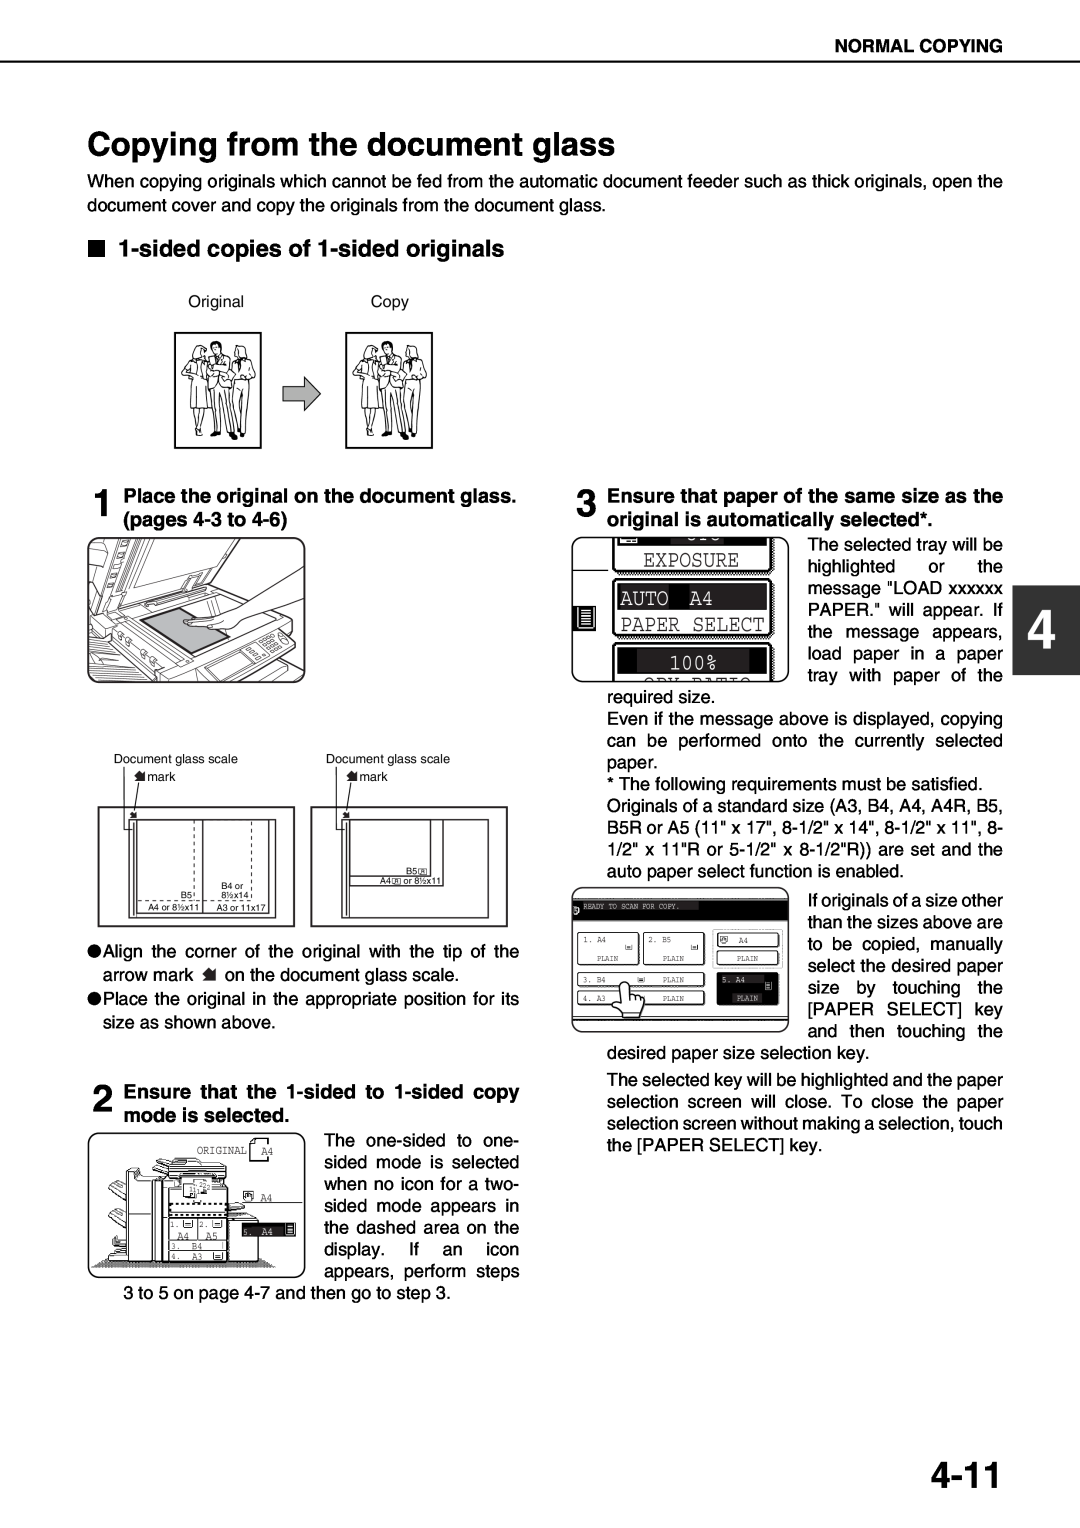 Sharp AR-M700N 4-11, Copying from the document glass, AUTO A4, Place the original on the document glass. pages 4-3 to 